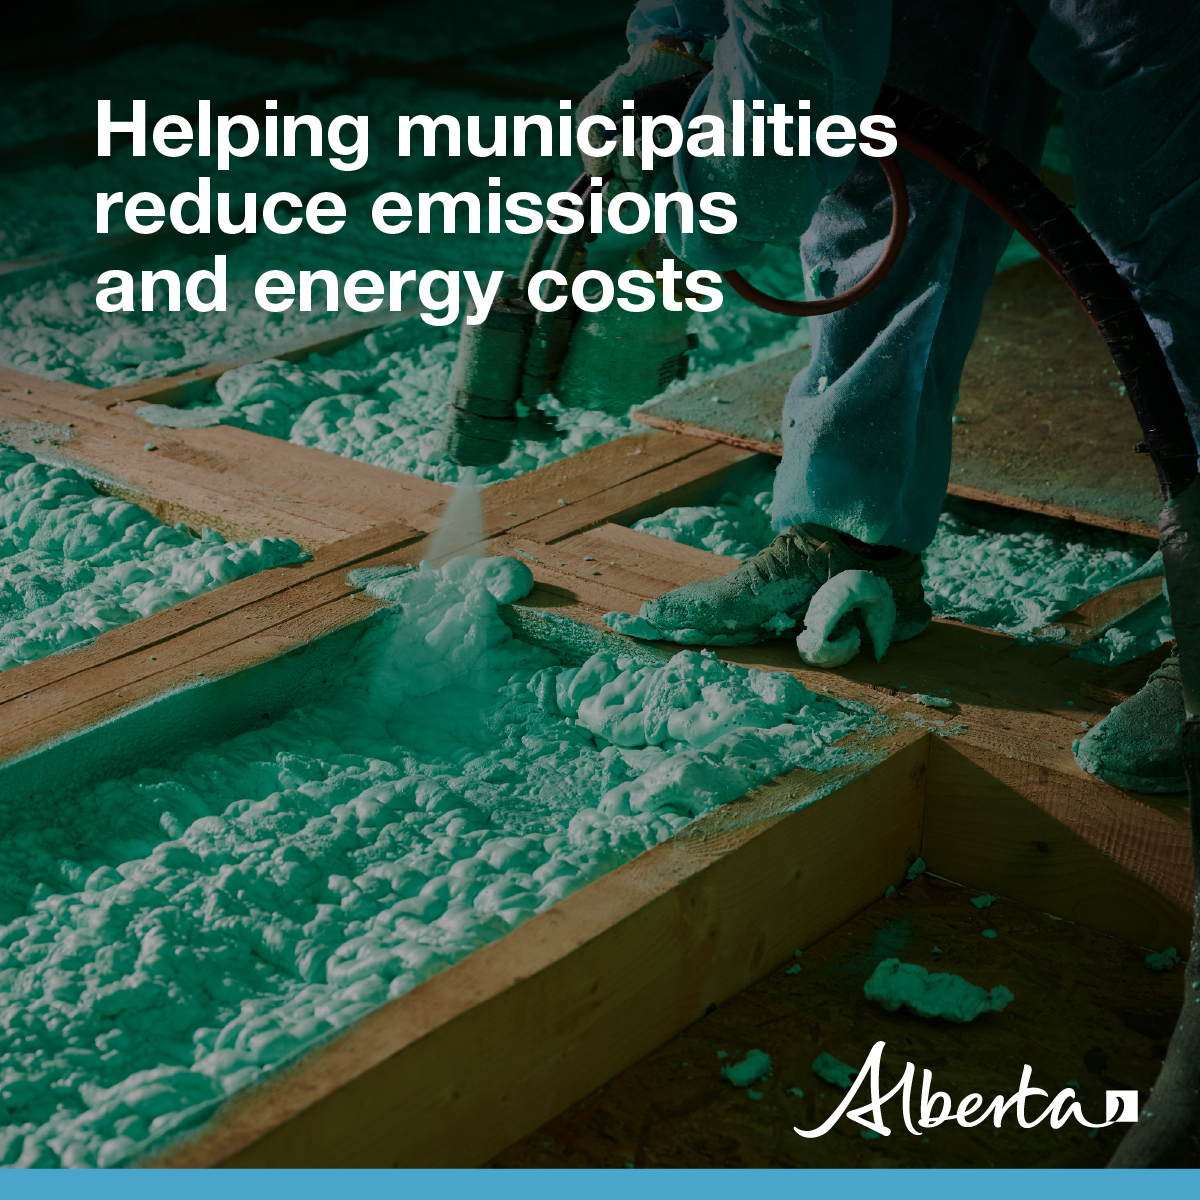 Municipalities can now apply to the Community Energy Conservation Program to make energy efficient upgrades to municipally-owned buildings. This will help communities of all sizes save energy, save money and reduce emissions: alberta.ca/release.cfm?xI…